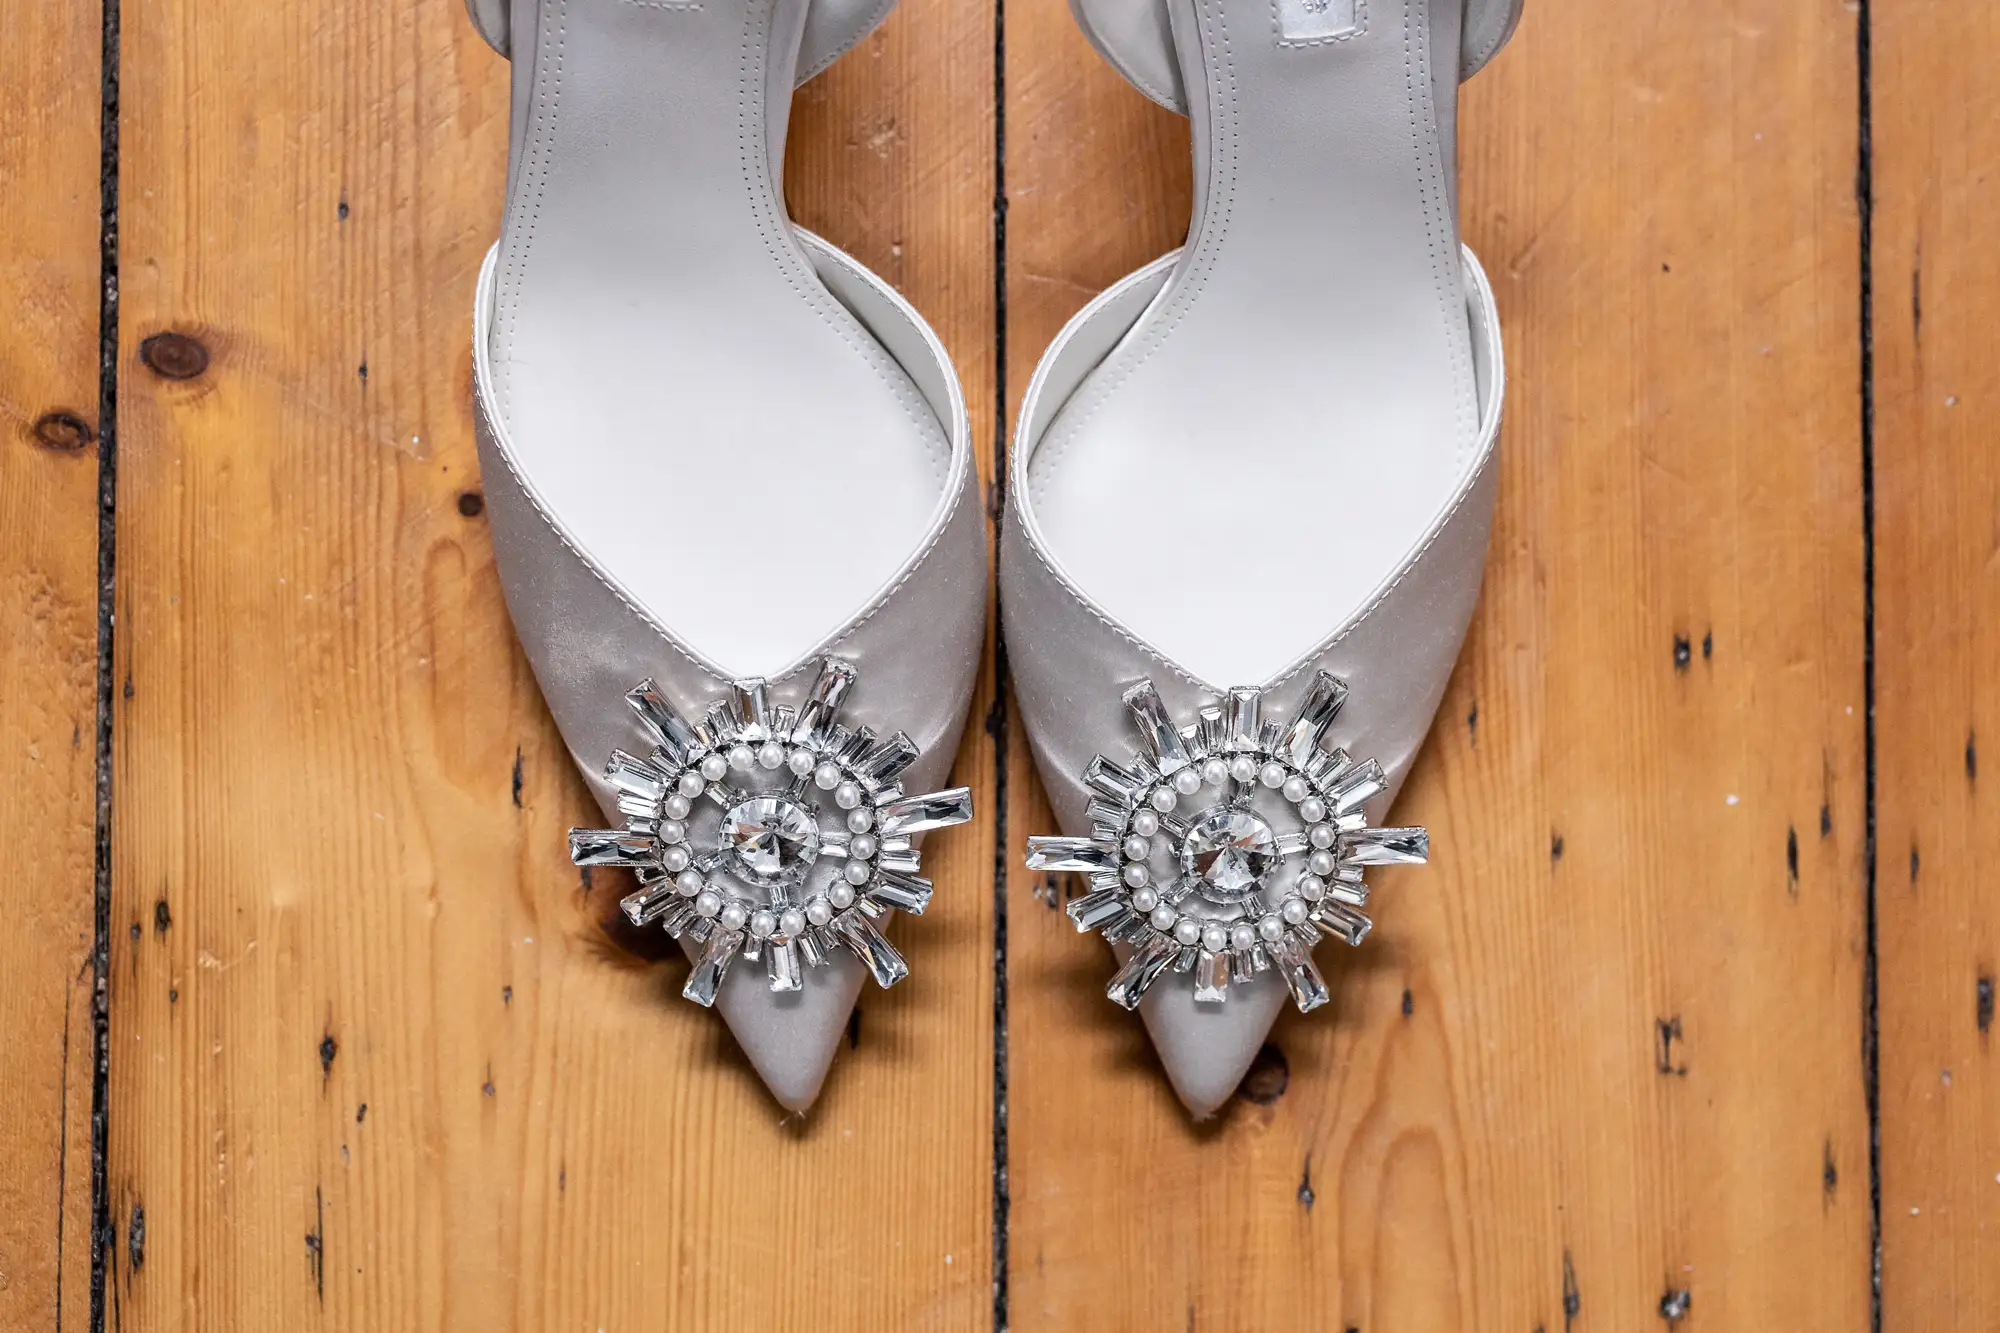 A pair of silver high-heeled shoes with decorative rhinestone embellishments on a wooden floor.